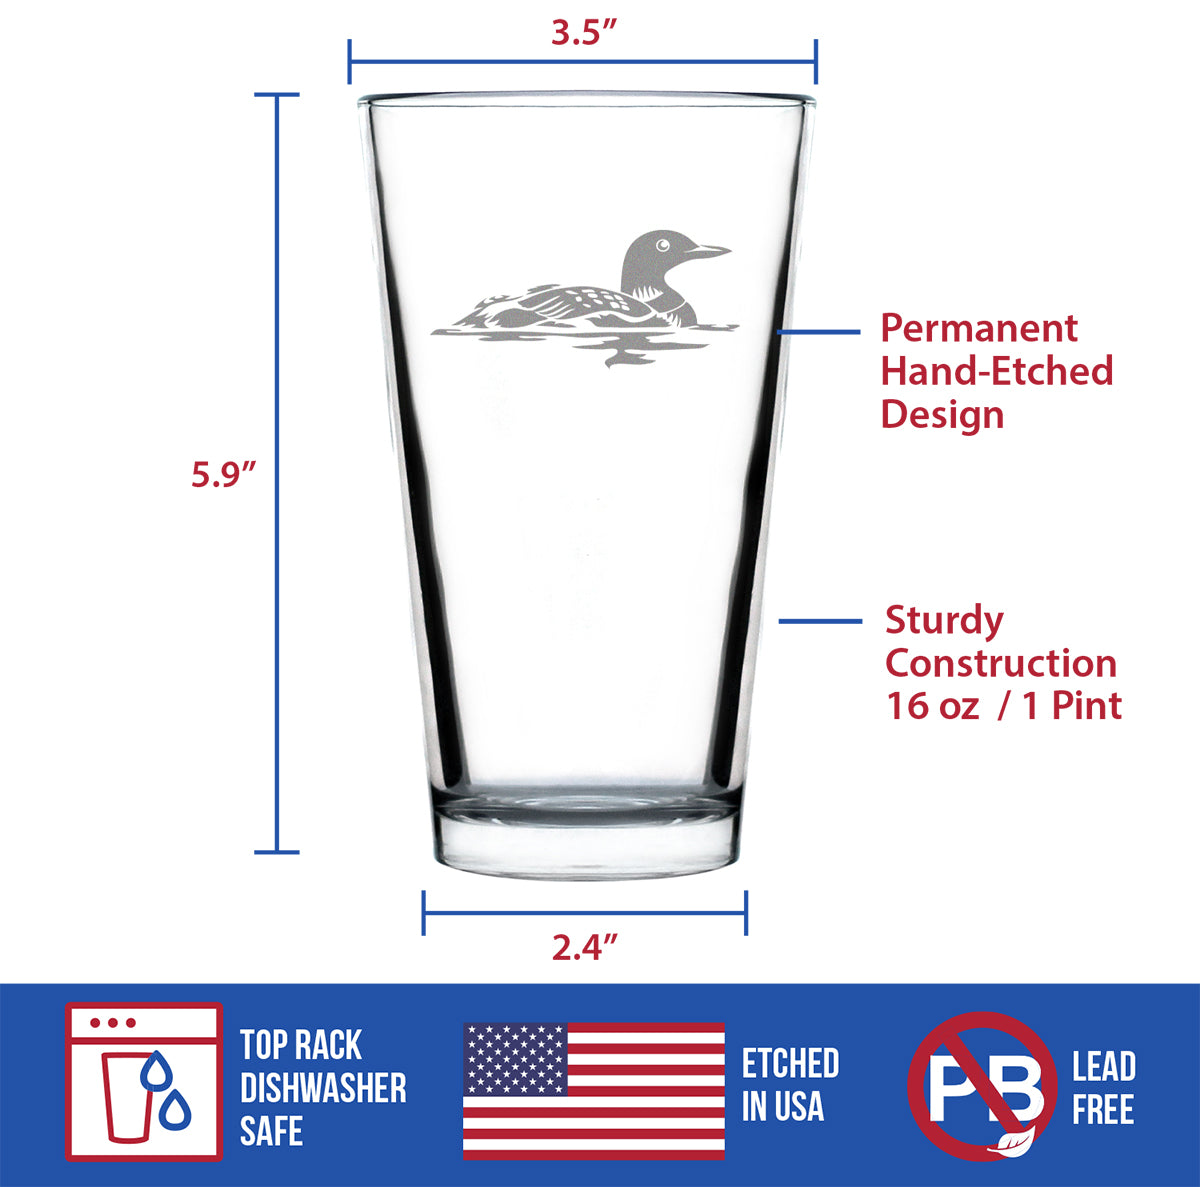 Loon Pint Glass for Beer - Fun Bird Themed Gifts and Decor for Men &amp; Women - 16 oz Glasses